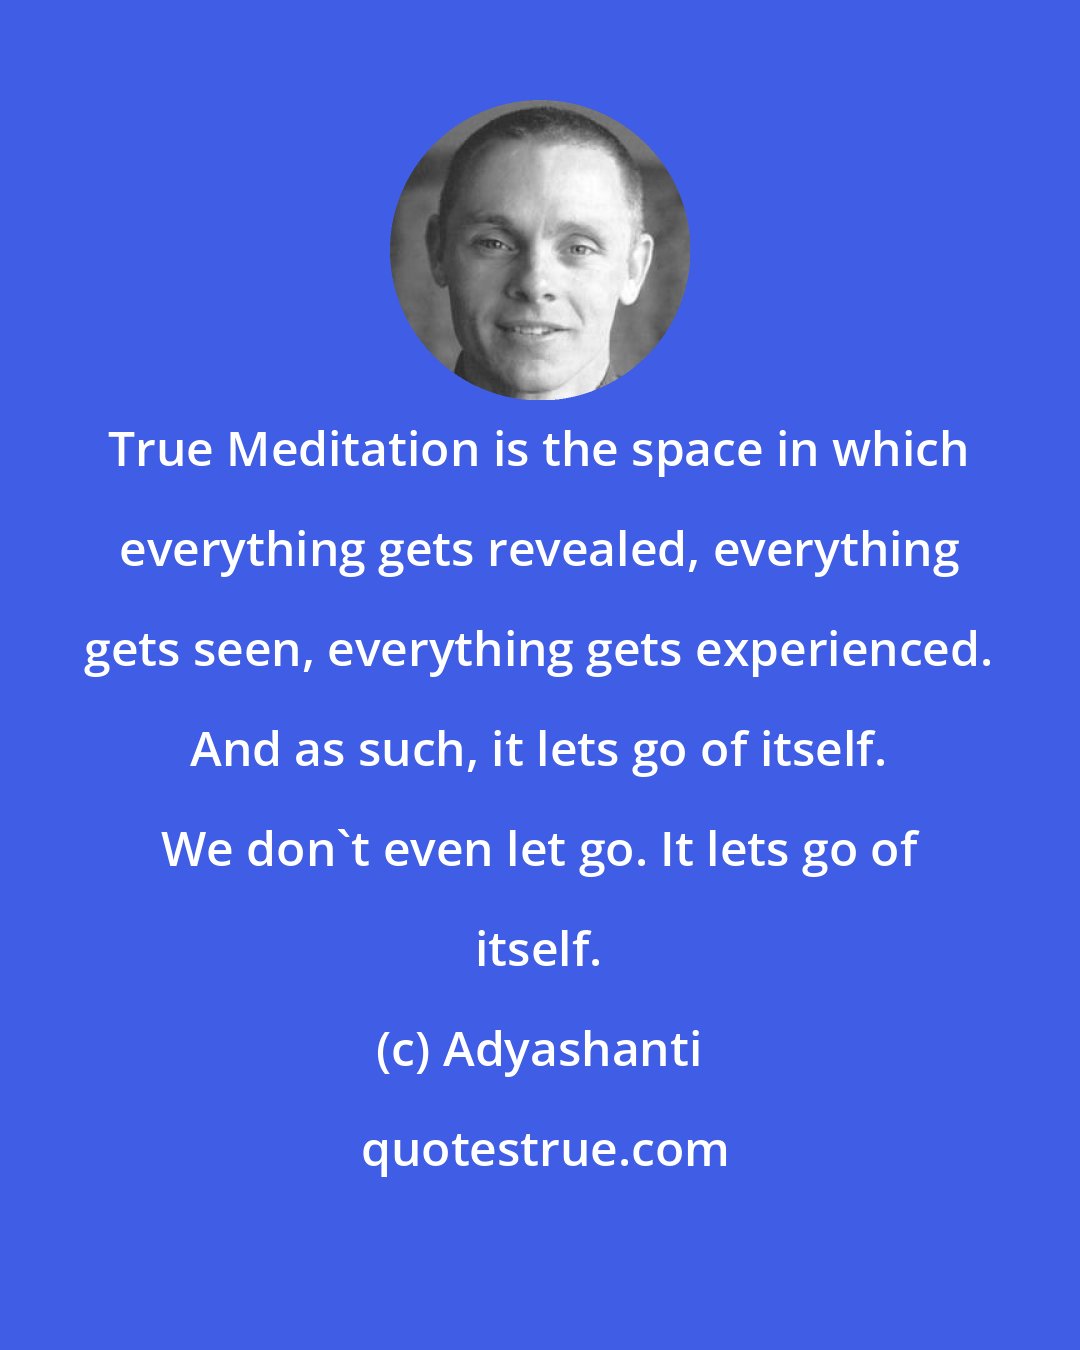 Adyashanti: True Meditation is the space in which everything gets revealed, everything gets seen, everything gets experienced. And as such, it lets go of itself. We don't even let go. It lets go of itself.